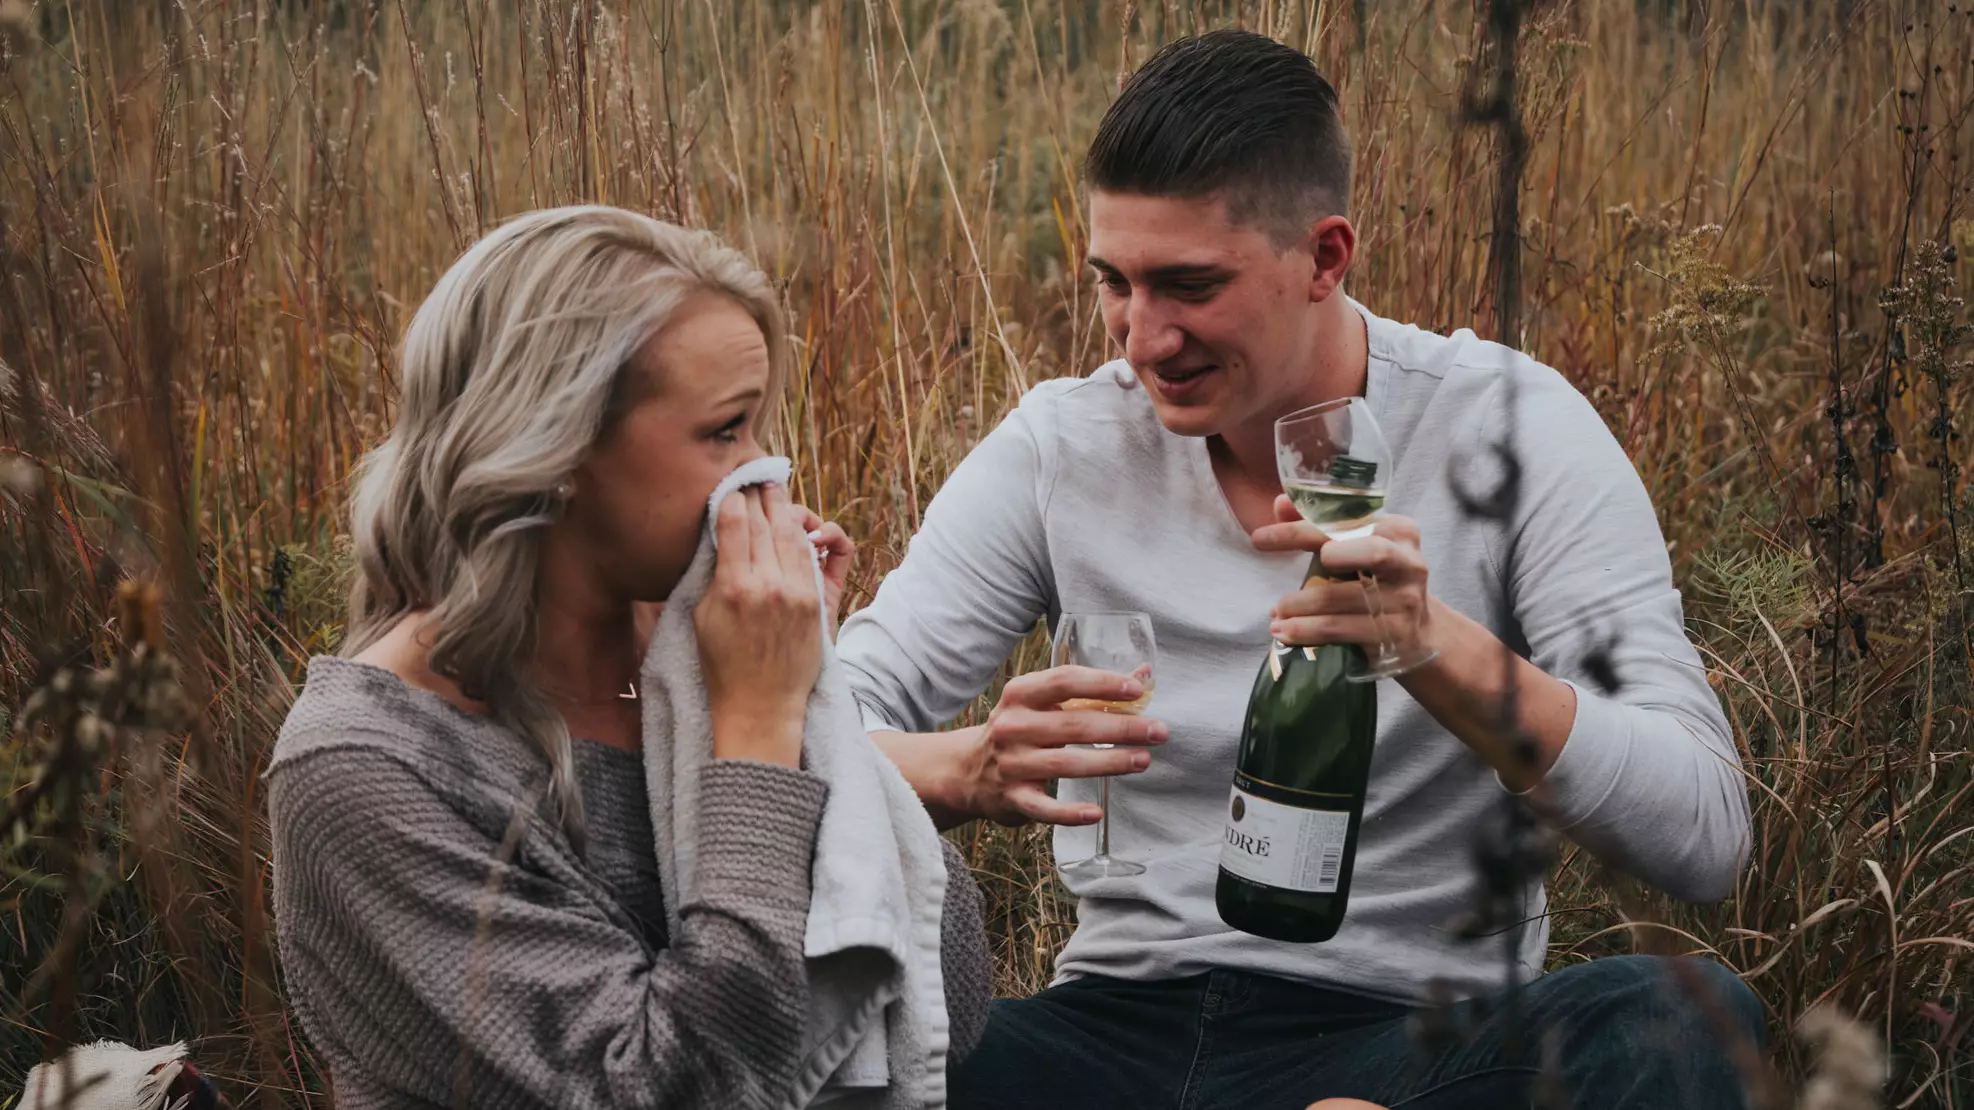 Couple's Spectacular Engagement Photo Fail Goes Viral